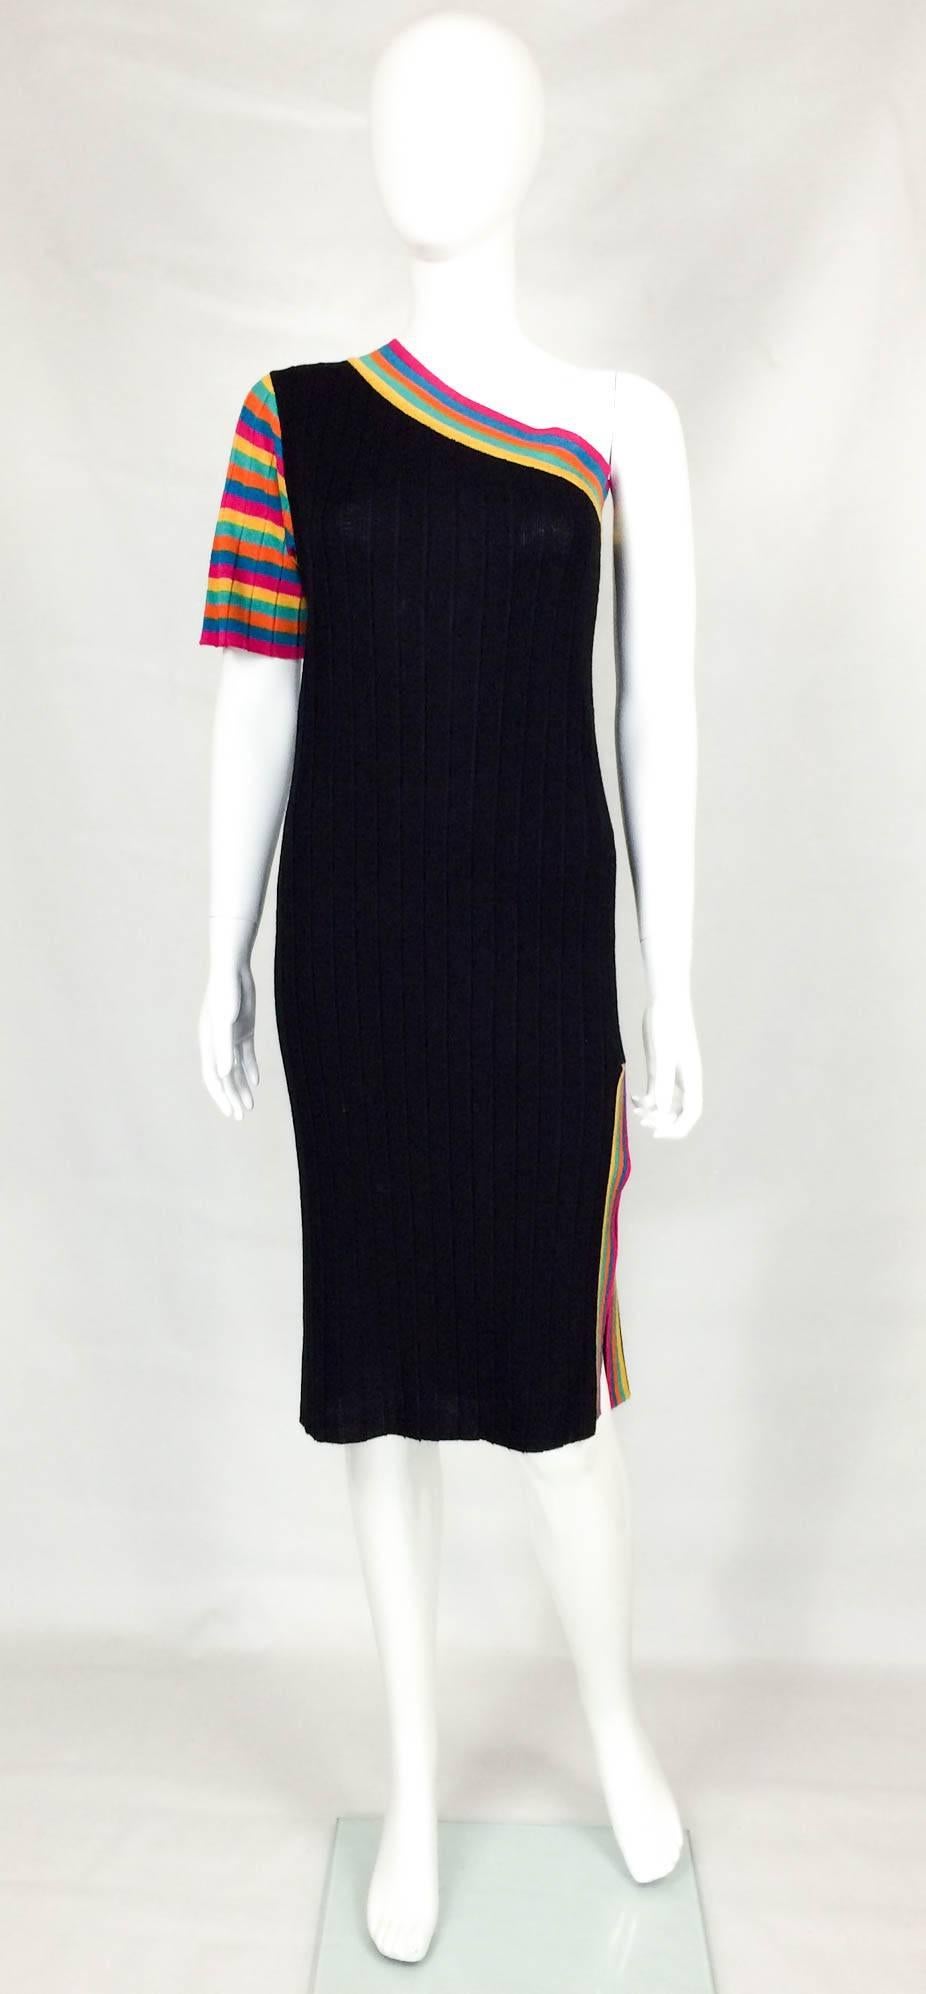 Hip Vintage Yves Saint Laurent Tricot Dress. This straight cut, one-shoulder, corrugated knitted dress was made by Yves Saint Laurent for designer Amen Wardy’s iconic boutique in Newport. It features colourful stripes on the neckline, sleeve and